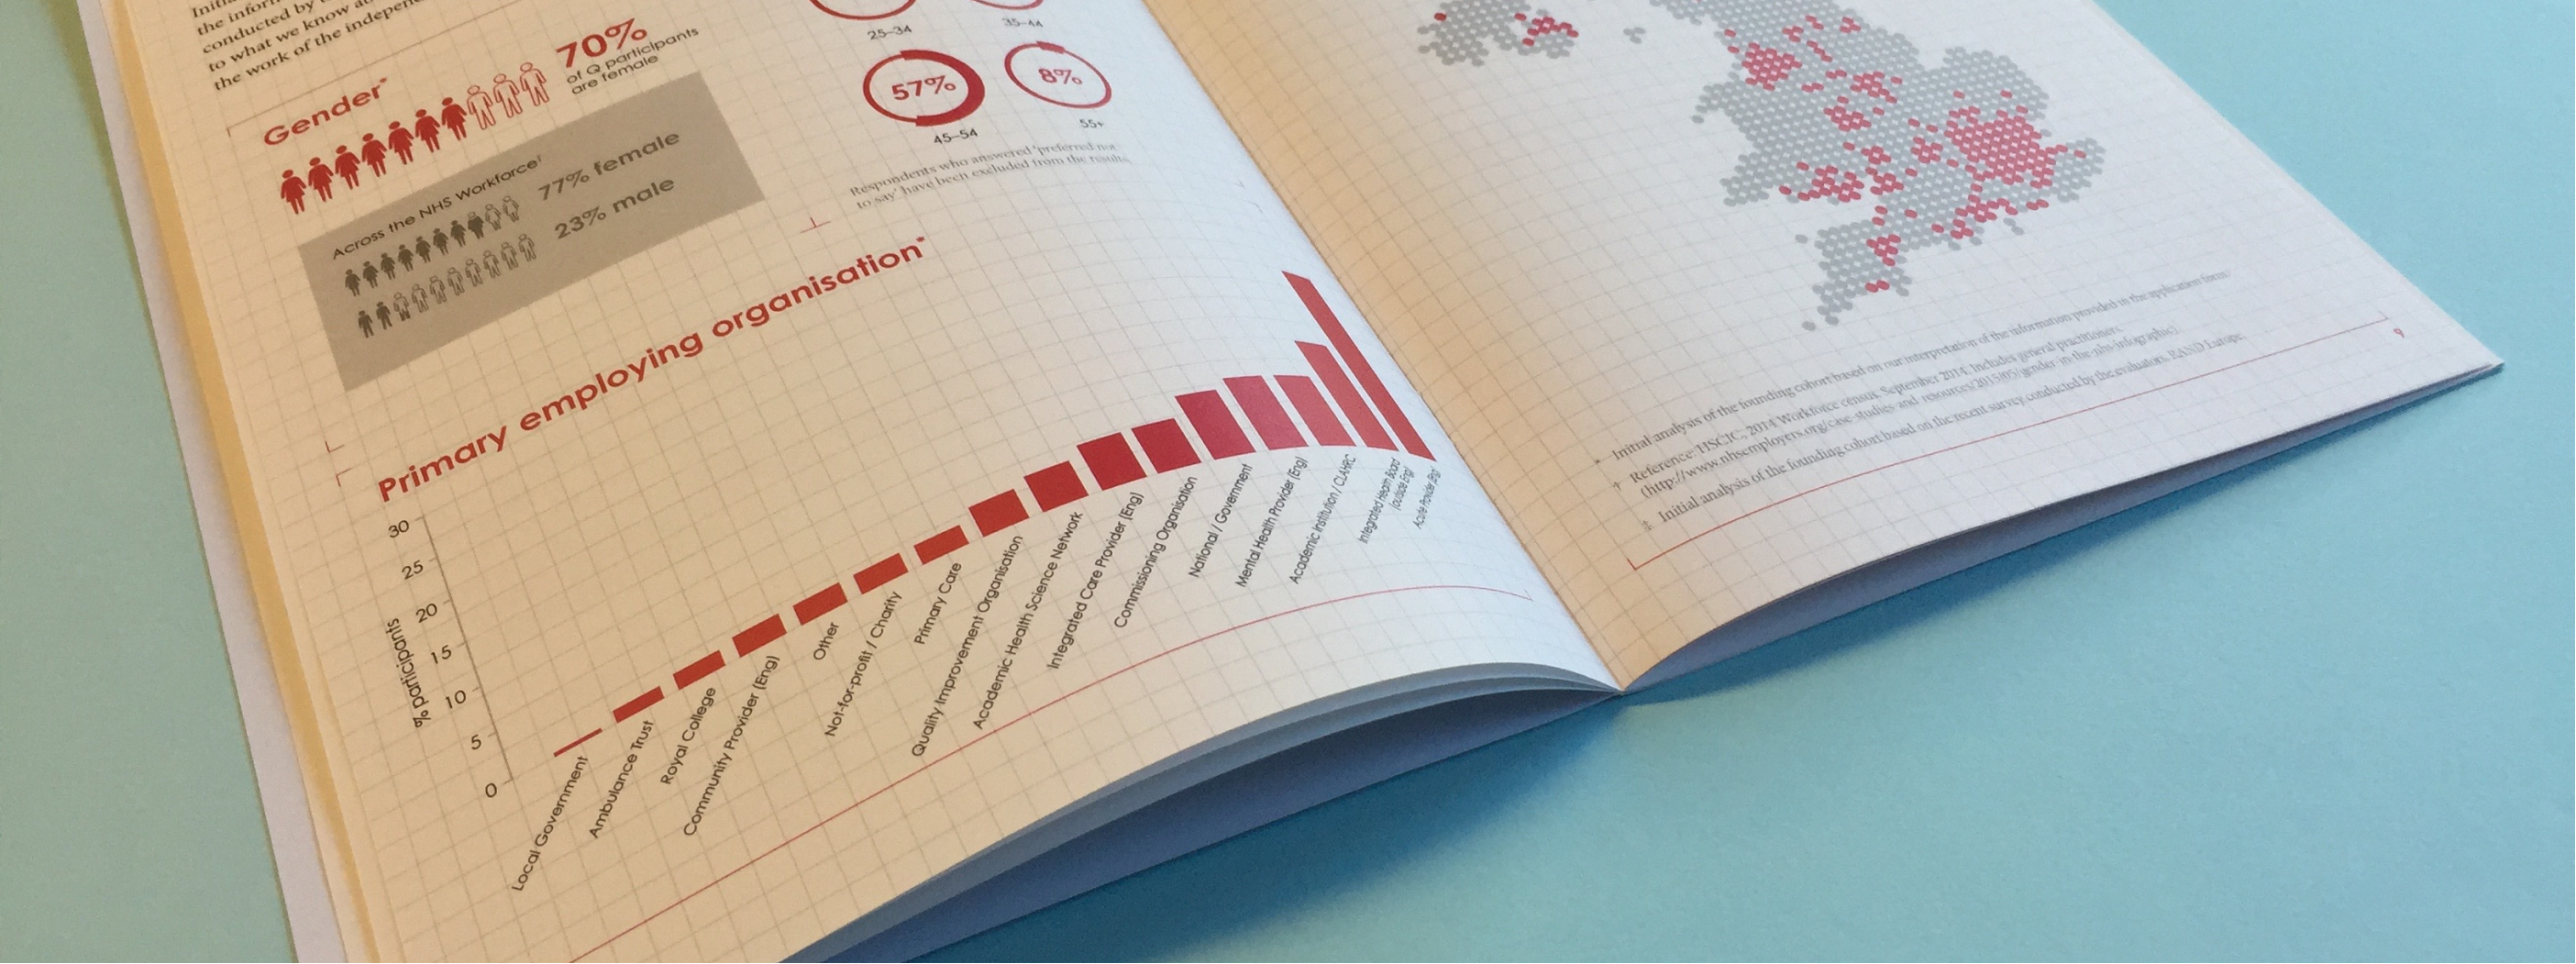 A photo of a printed report detailing area population in the uk in an infographic